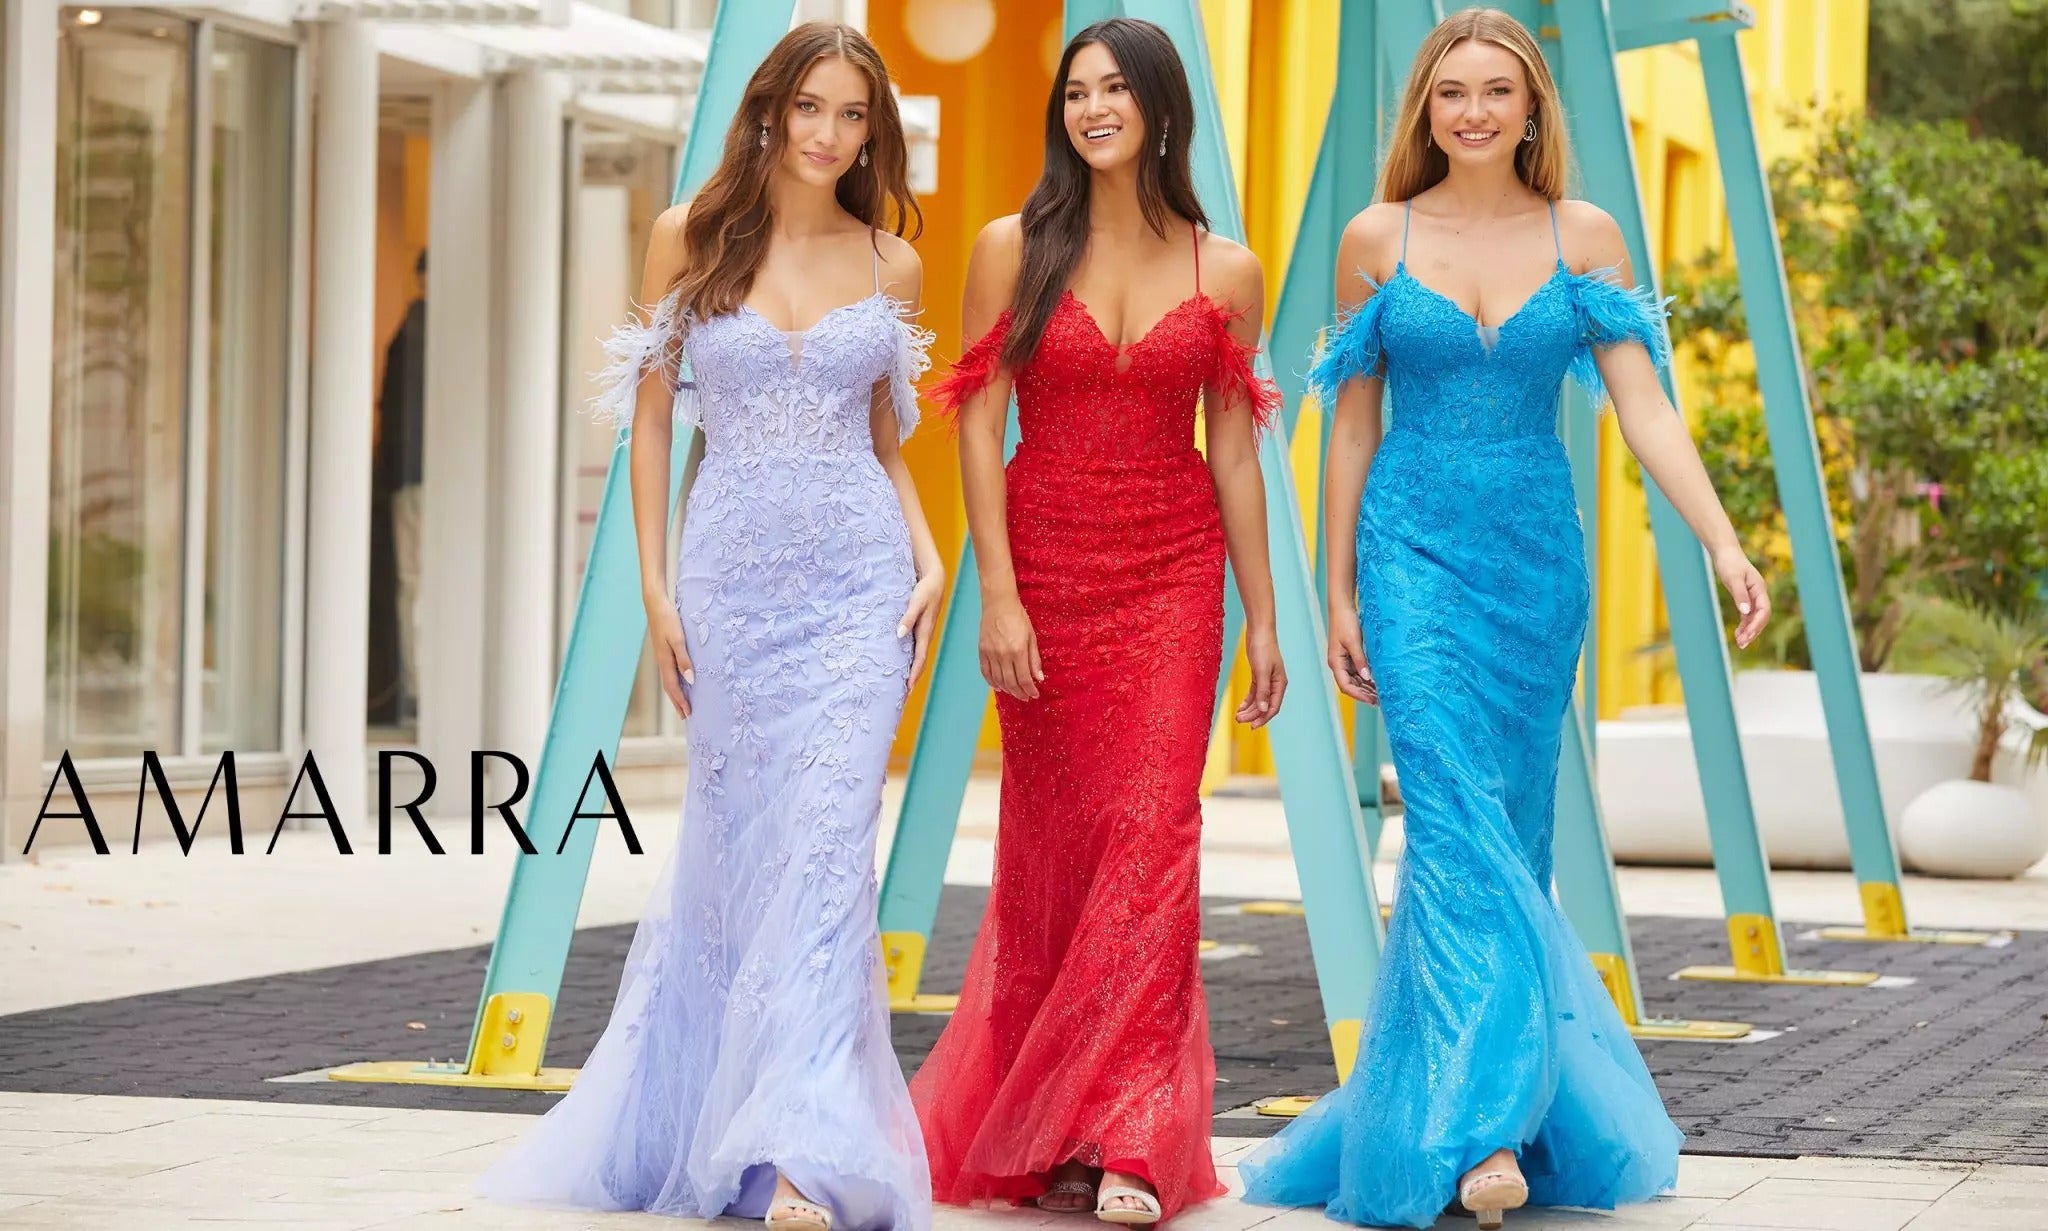 Prom Dresses: The Ultimate Guide to Finding the Perfect Dress